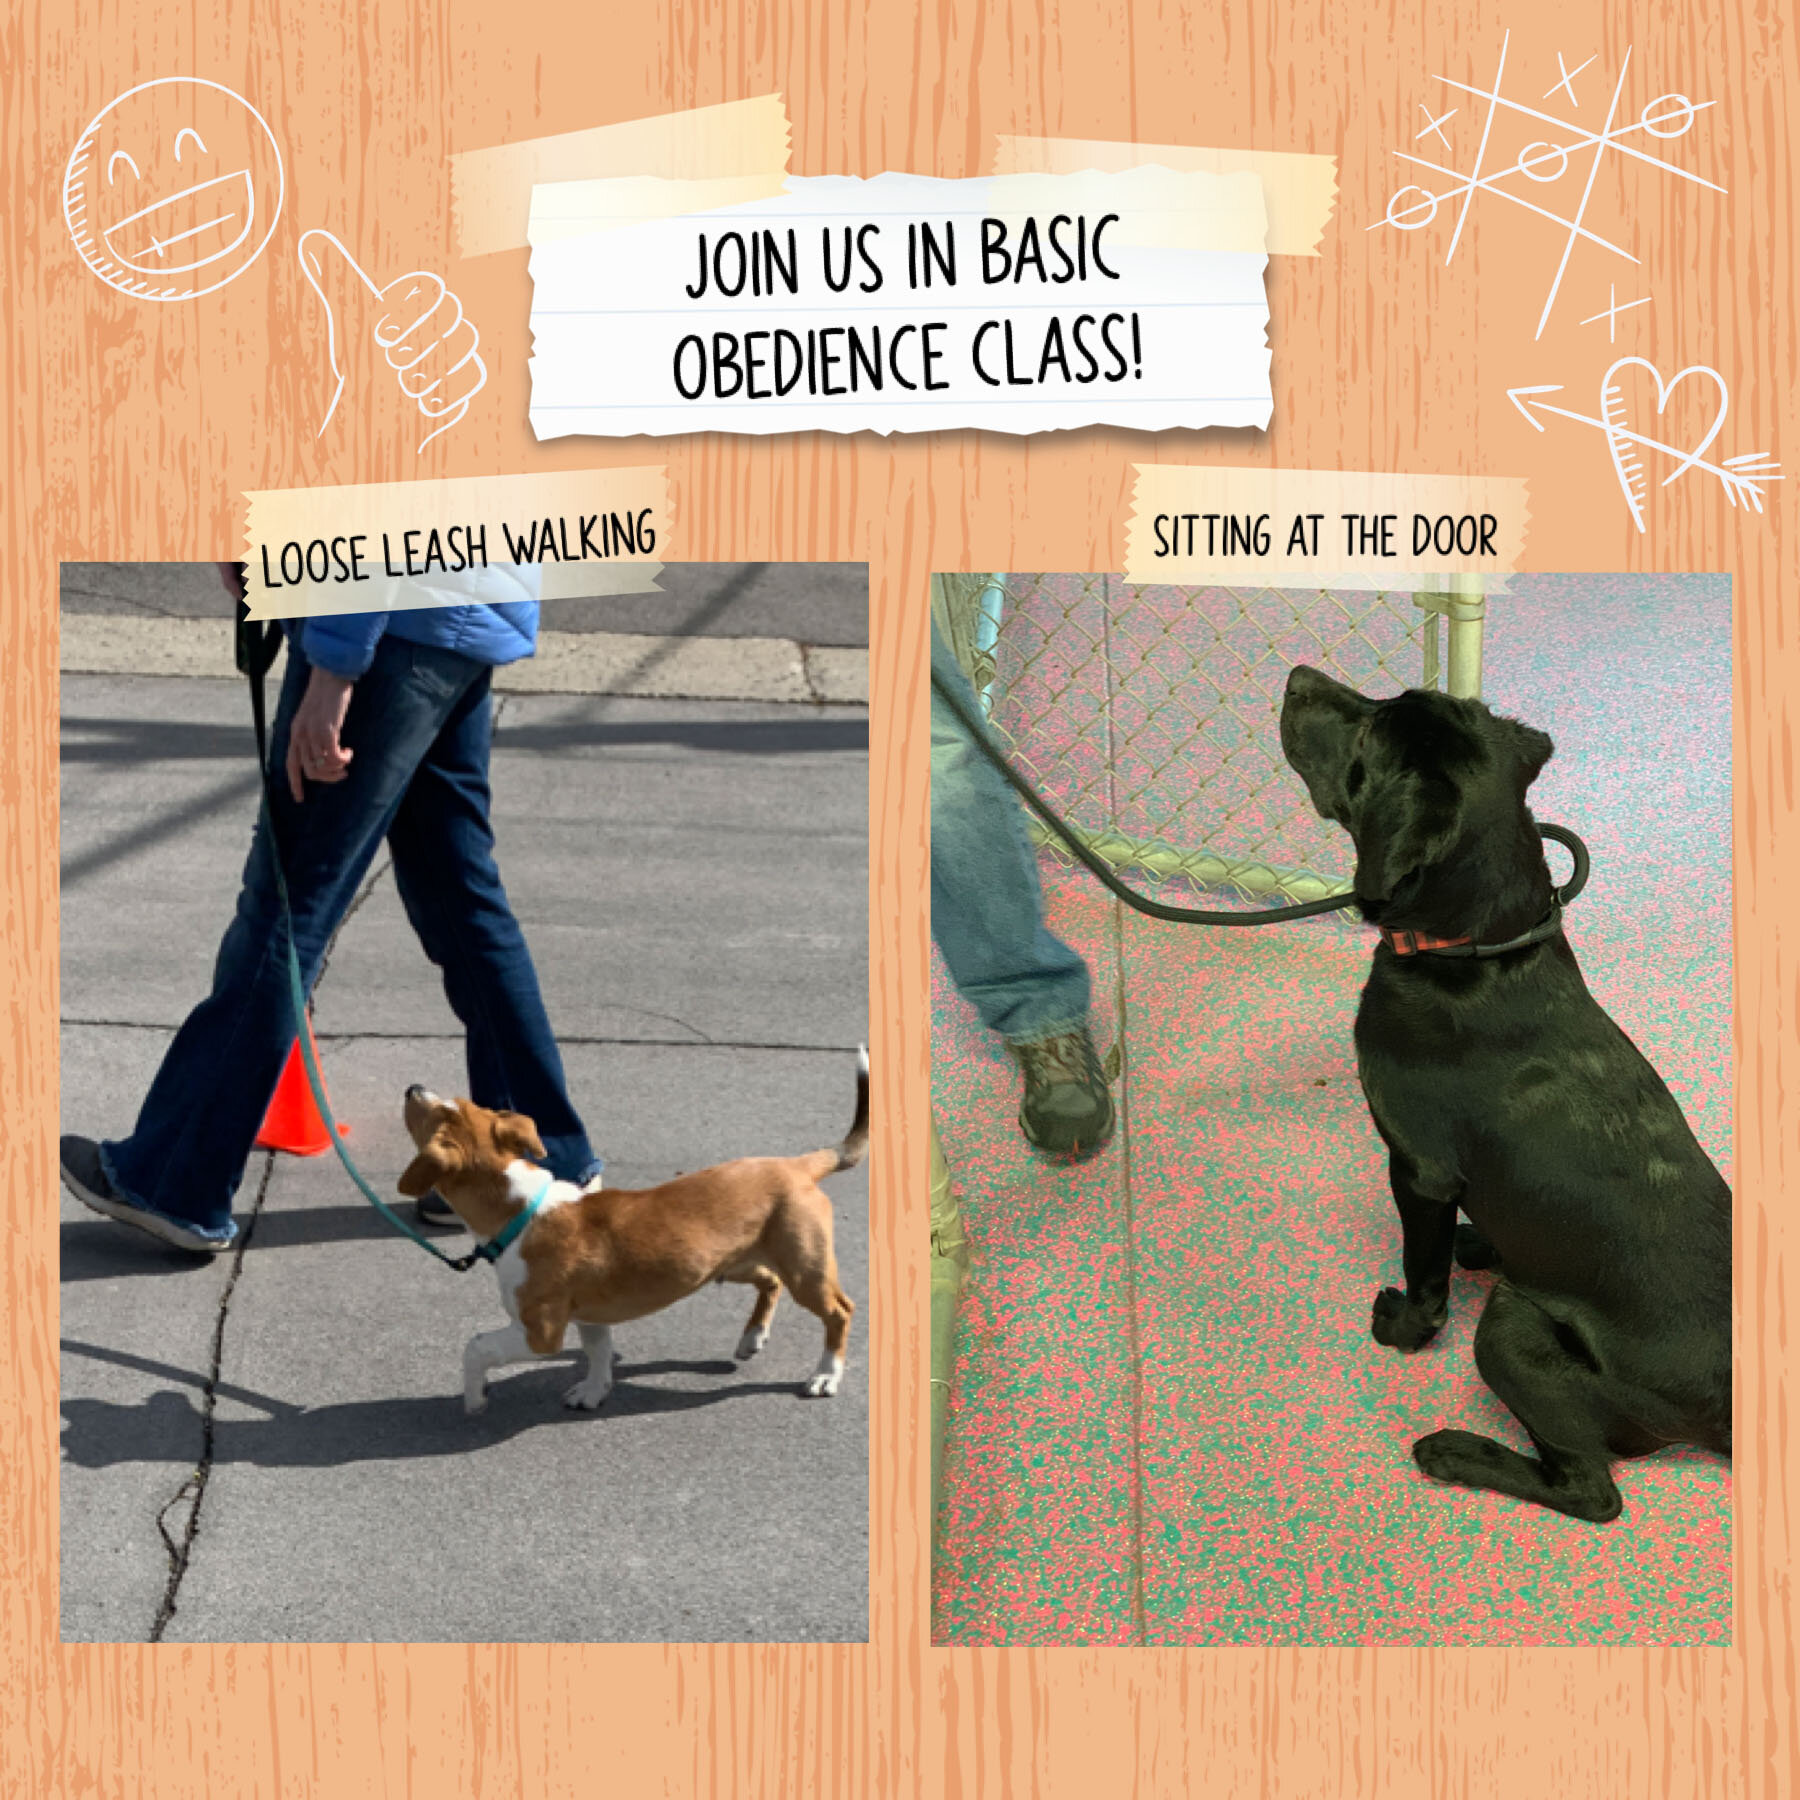 Join us in obedience class!